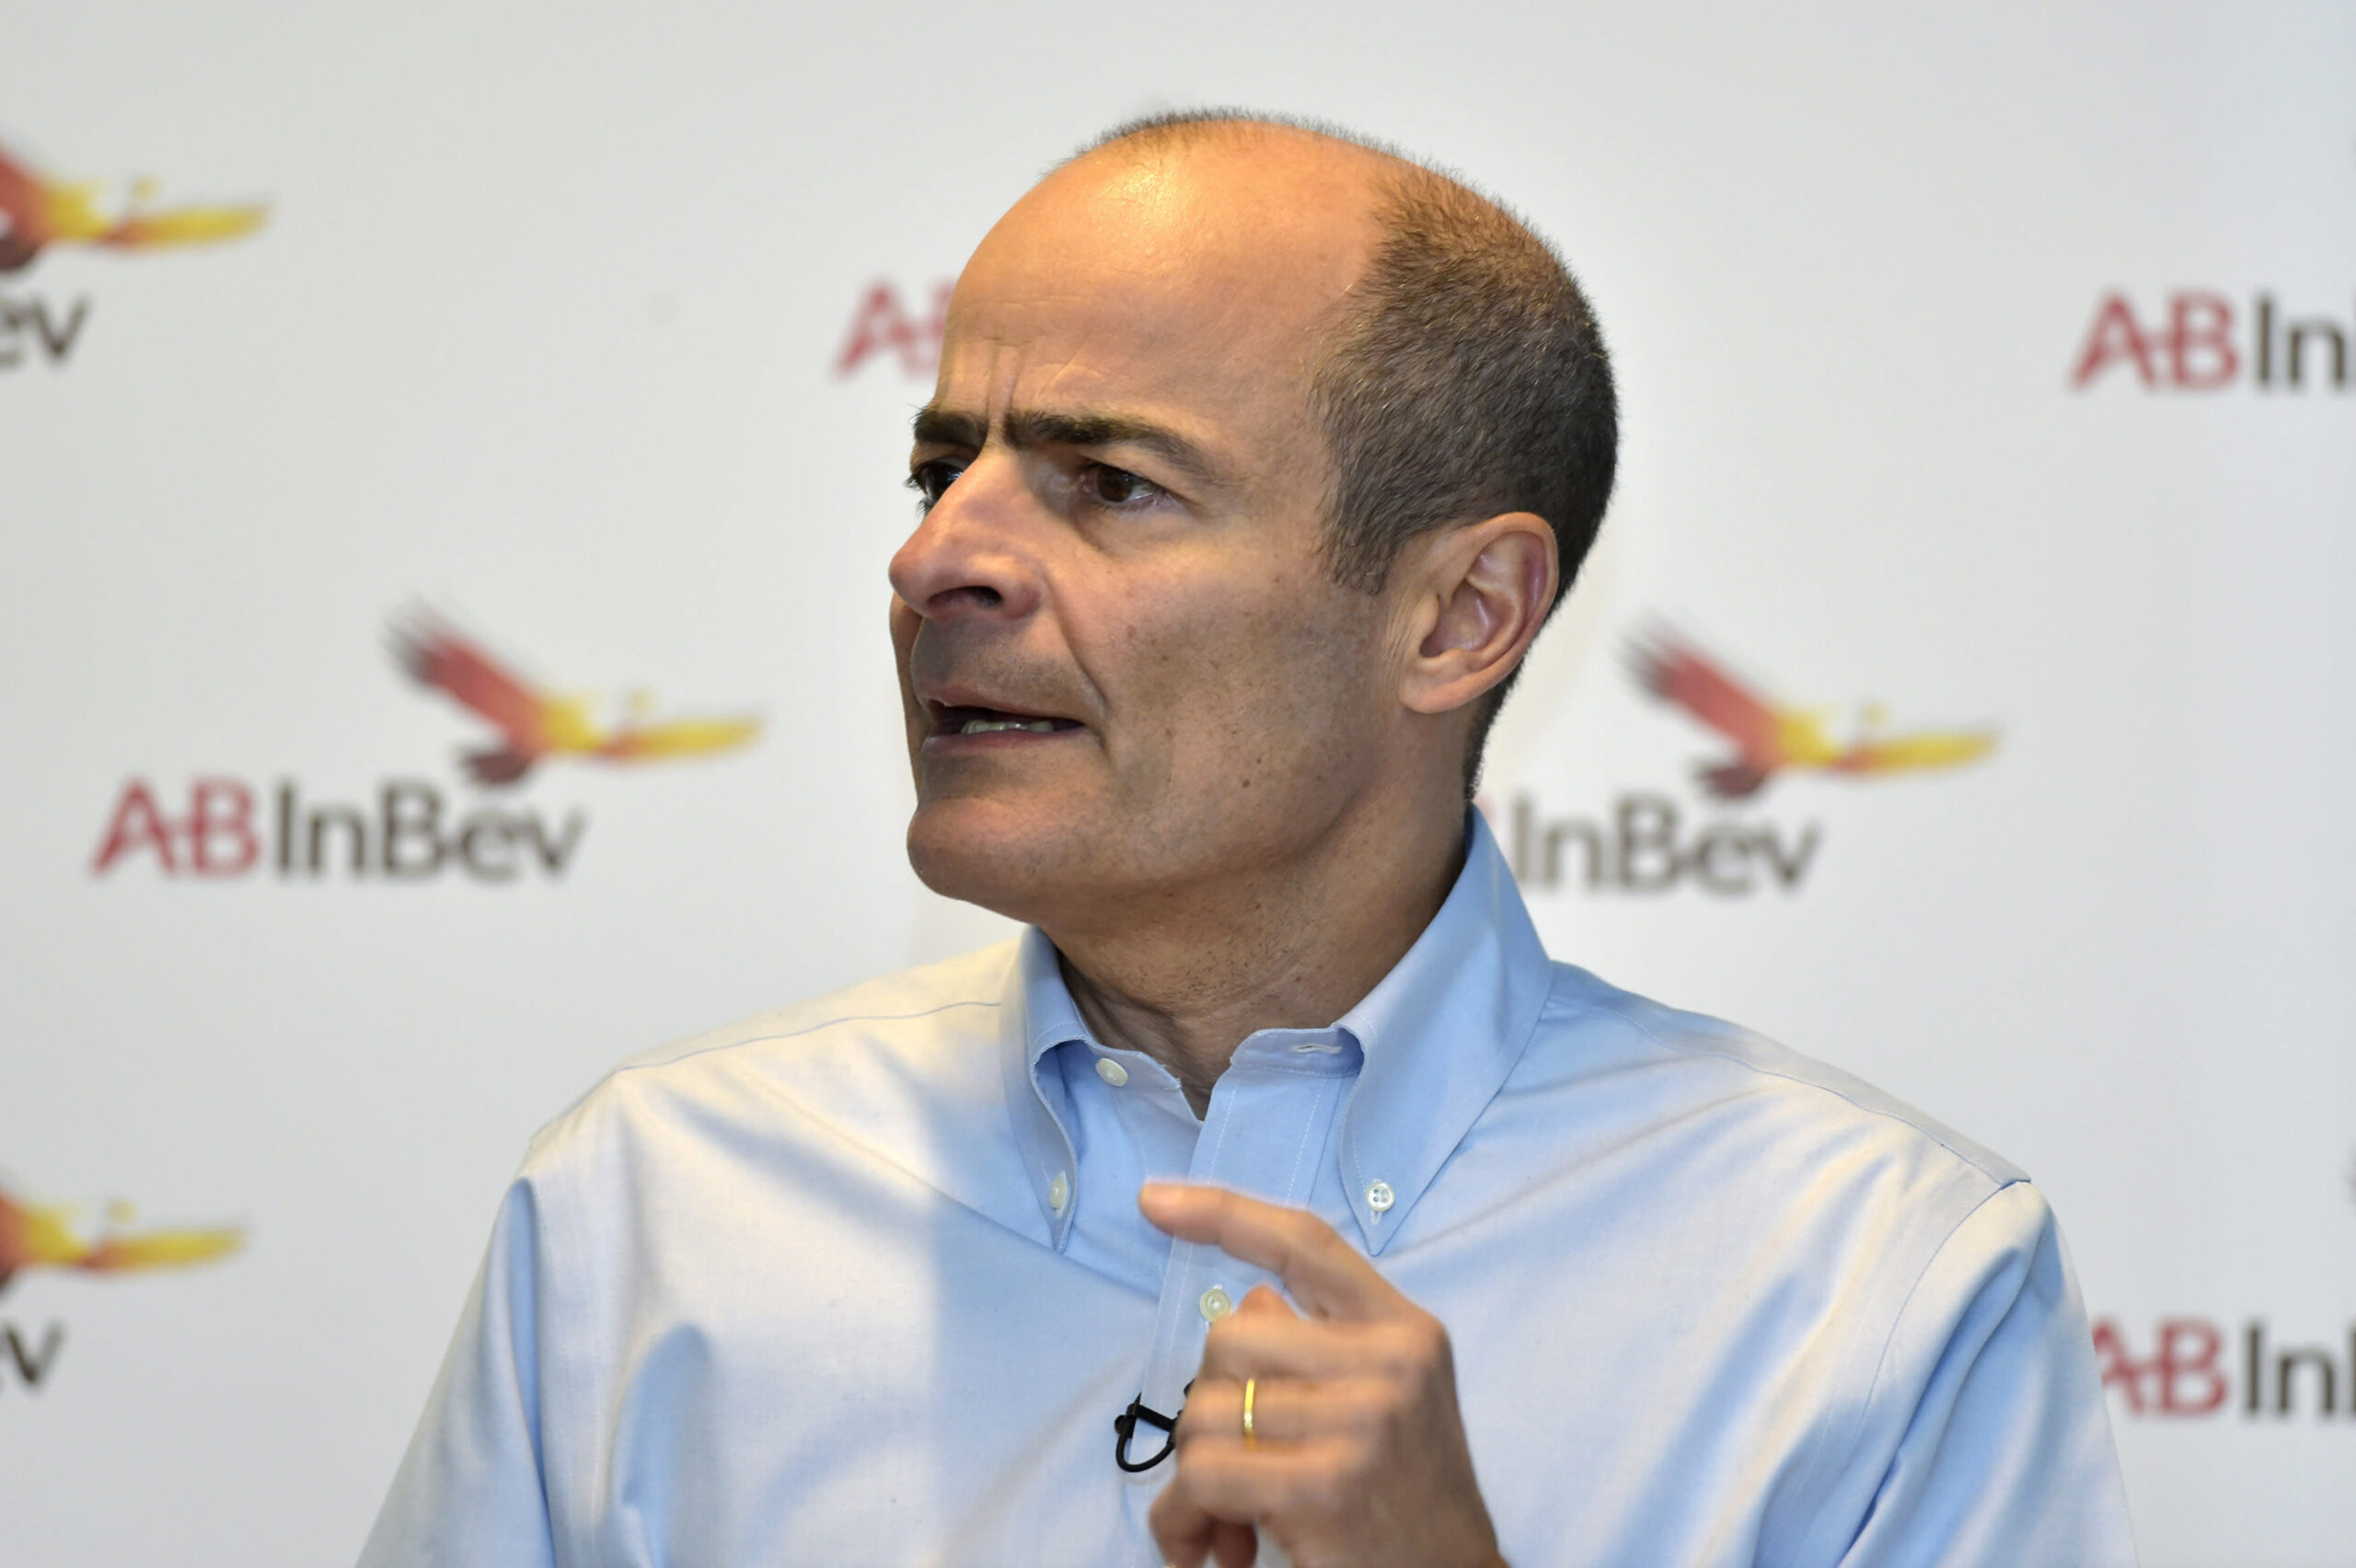 Anheuser-Busch InBev CEO on return to pre-Covid ingesting routines